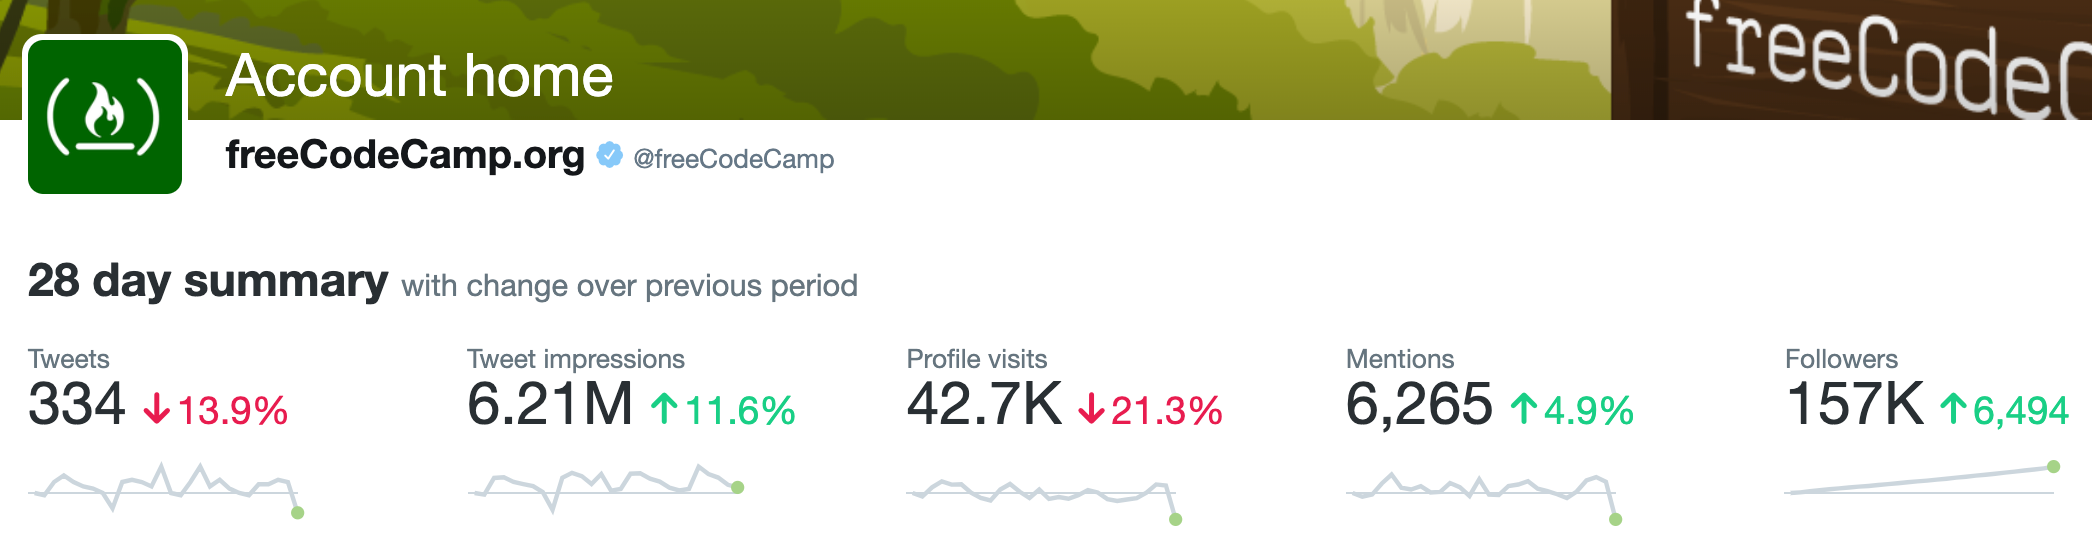 Twitter_Analytics_account_overview_for_freeCodeCamp